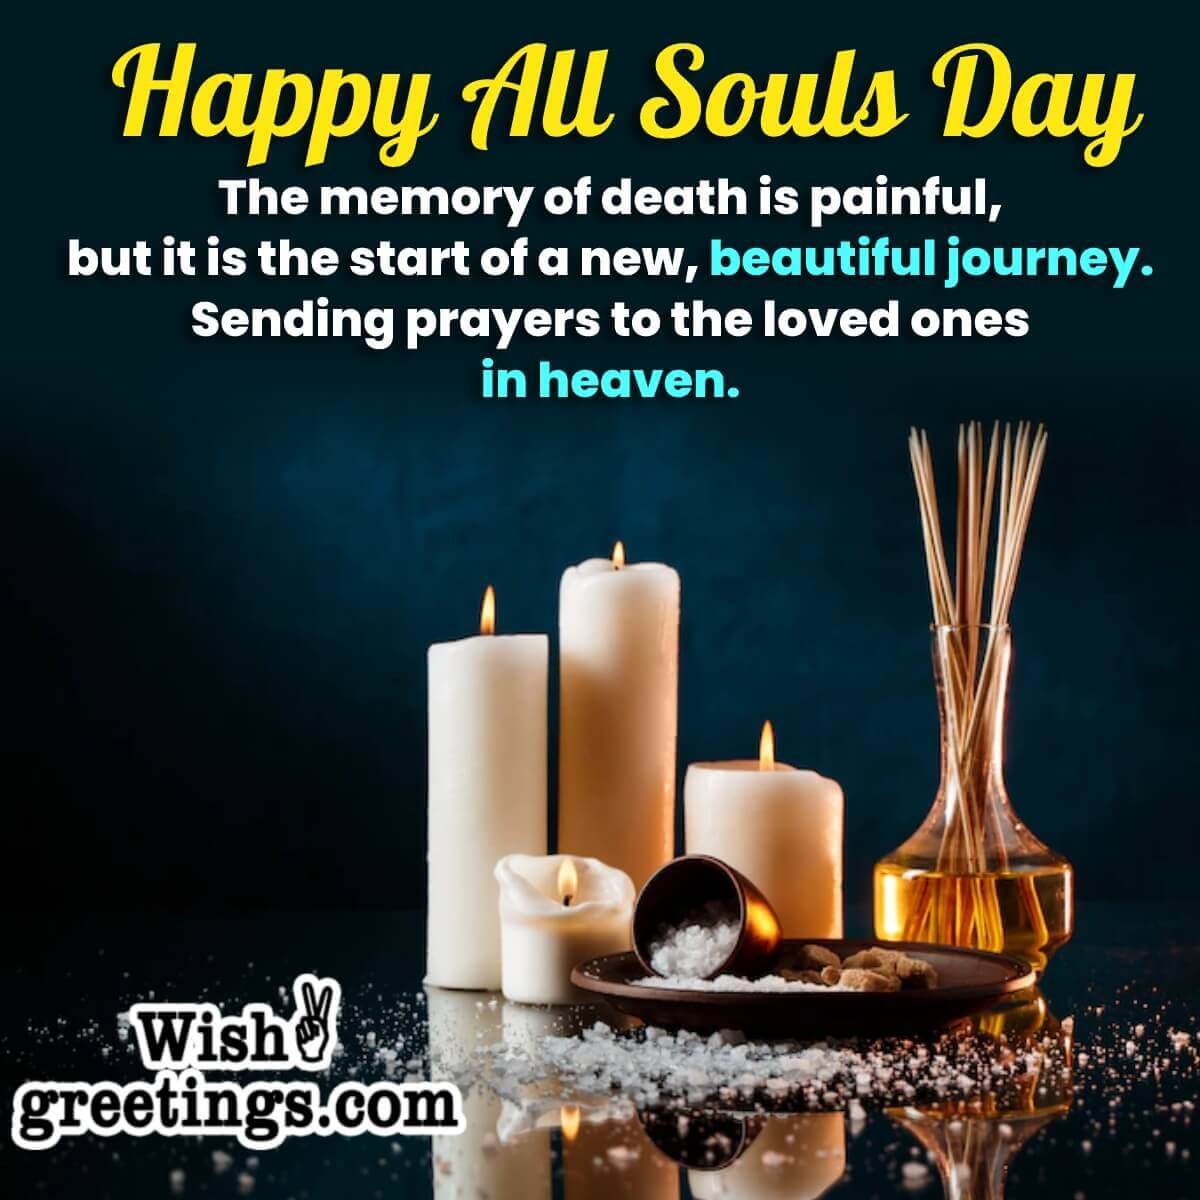 Happy All Souls Day